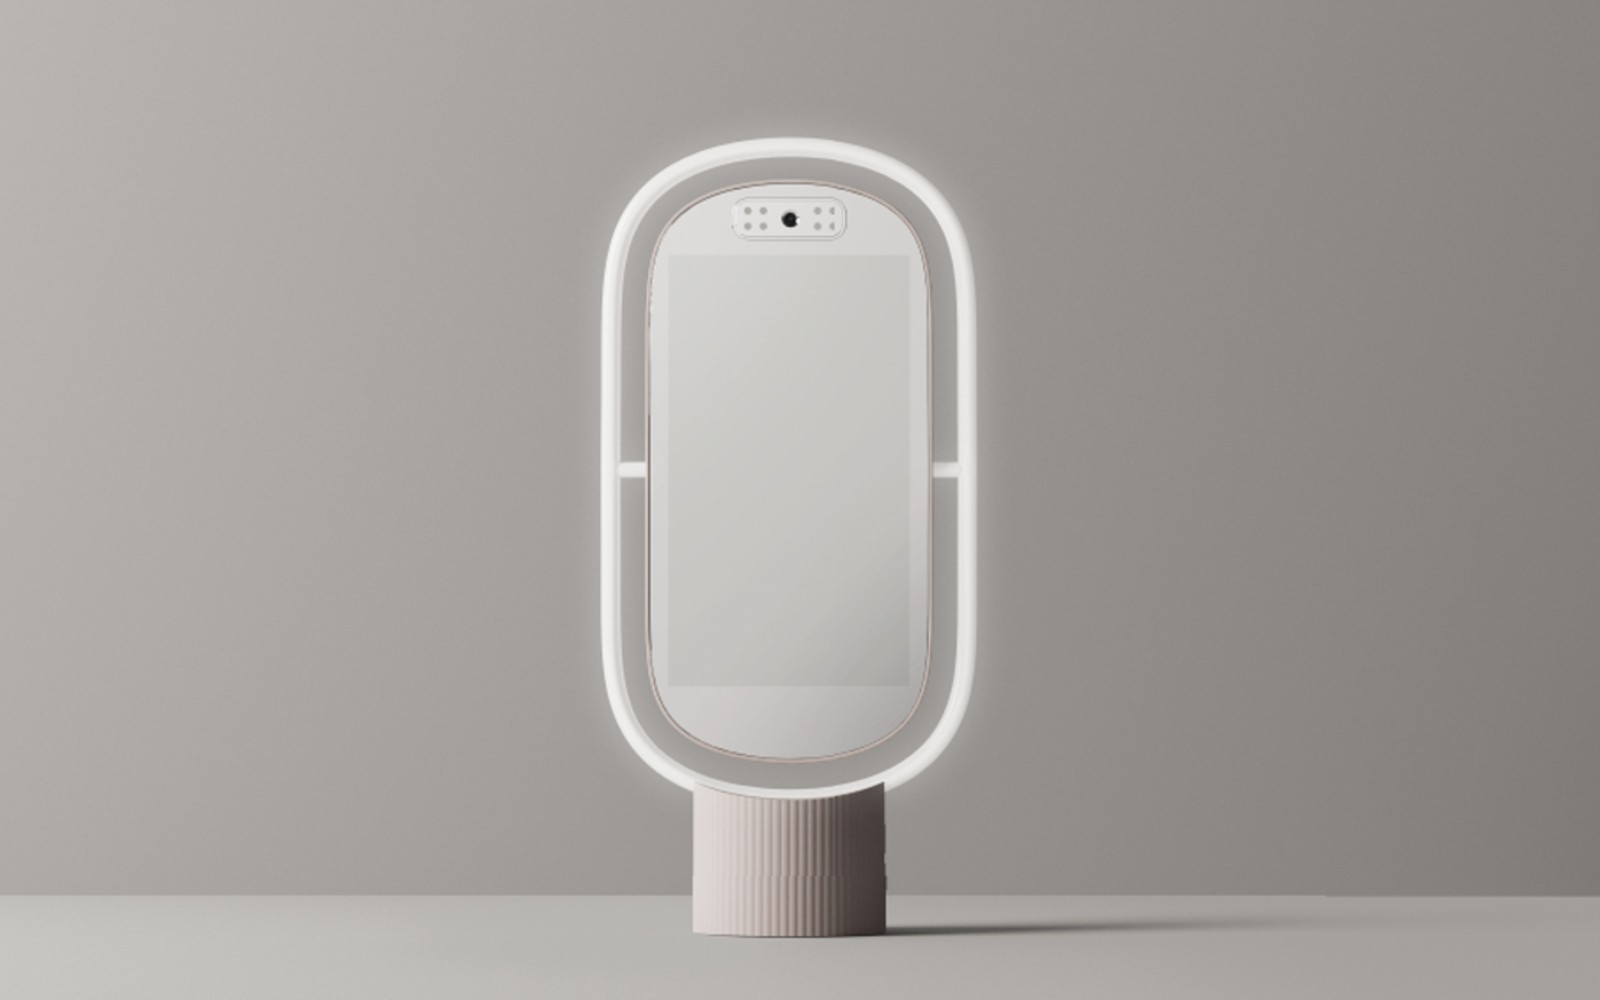 Lululab's Lumini PM is smart mirror that offers skincare suggestions | DeviceDaily.com